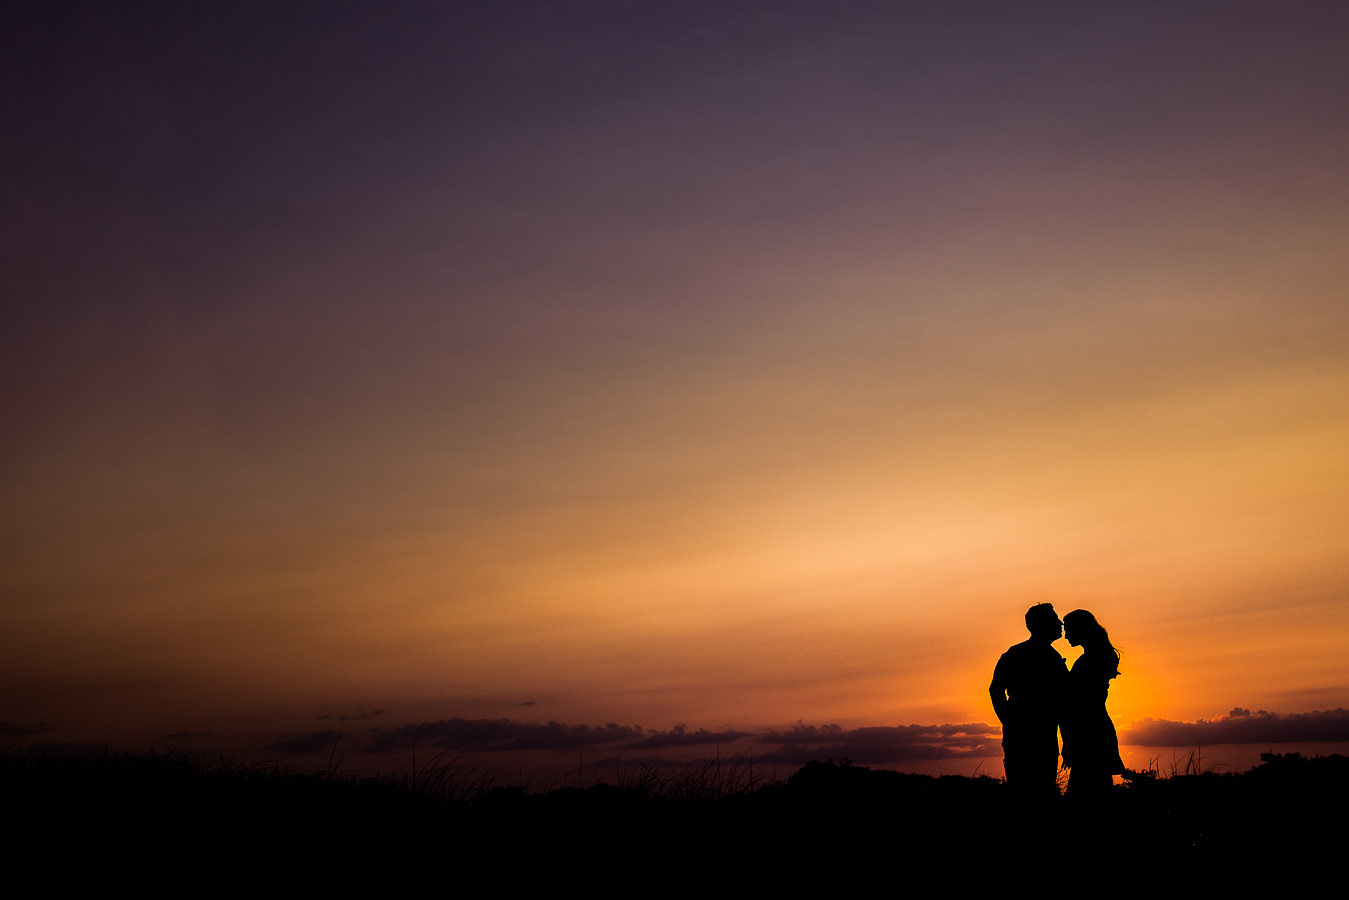 NJ Shore Engagement photographer, lisa rhinehart, captures this stunning colorful, vibrant image of the newly engaged couple standing with each other as the sun sets on the beach 